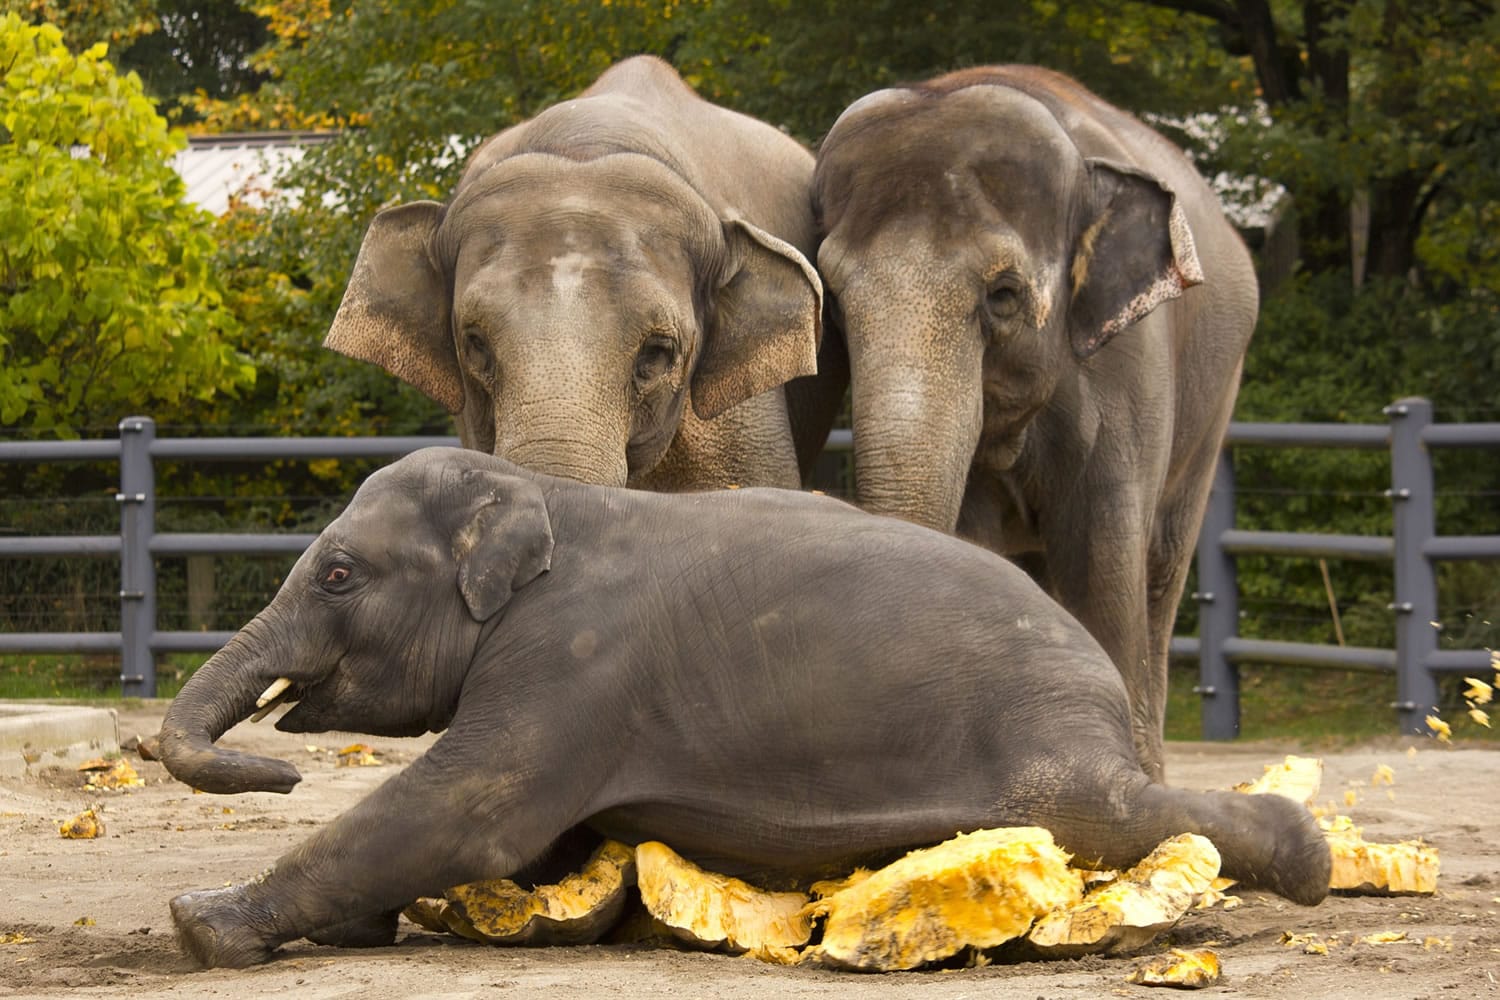 The elephants will take on a giant pumpkin for &quot;Squishing of the Squash&quot; Oct. 24 at the Oregon Zoo.